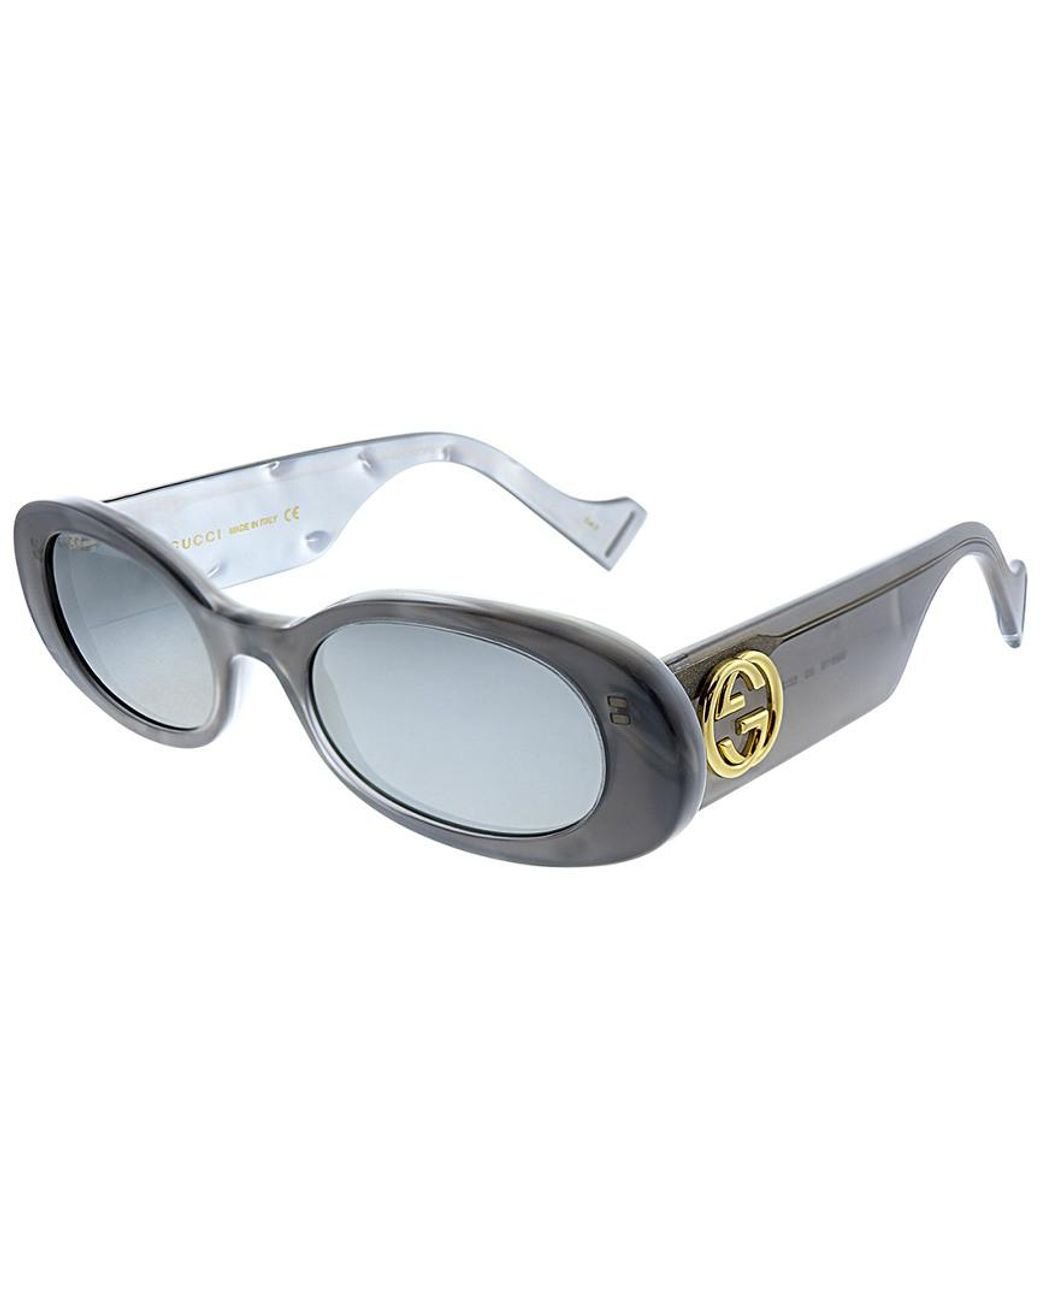 Gucci GG0517S 002 Women's Sunglasses Grey Size 52 - Free Rx Lenses in Gray  | Lyst